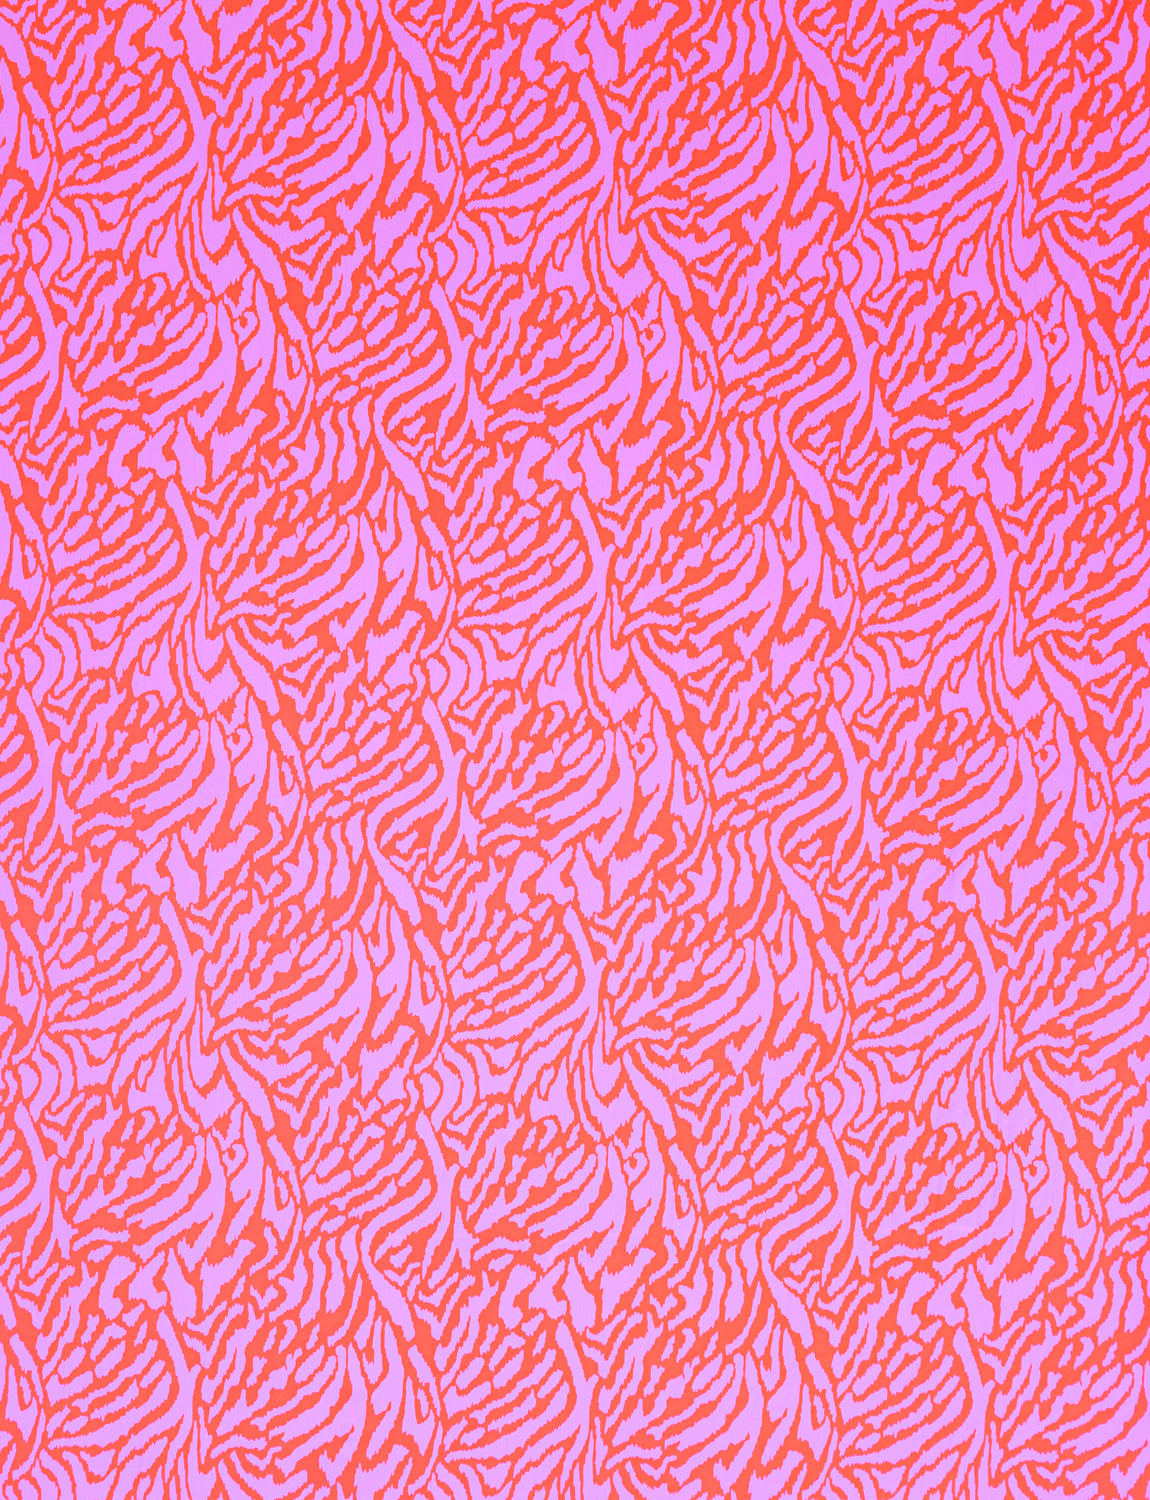 pink and red patterned uv reactive fabric